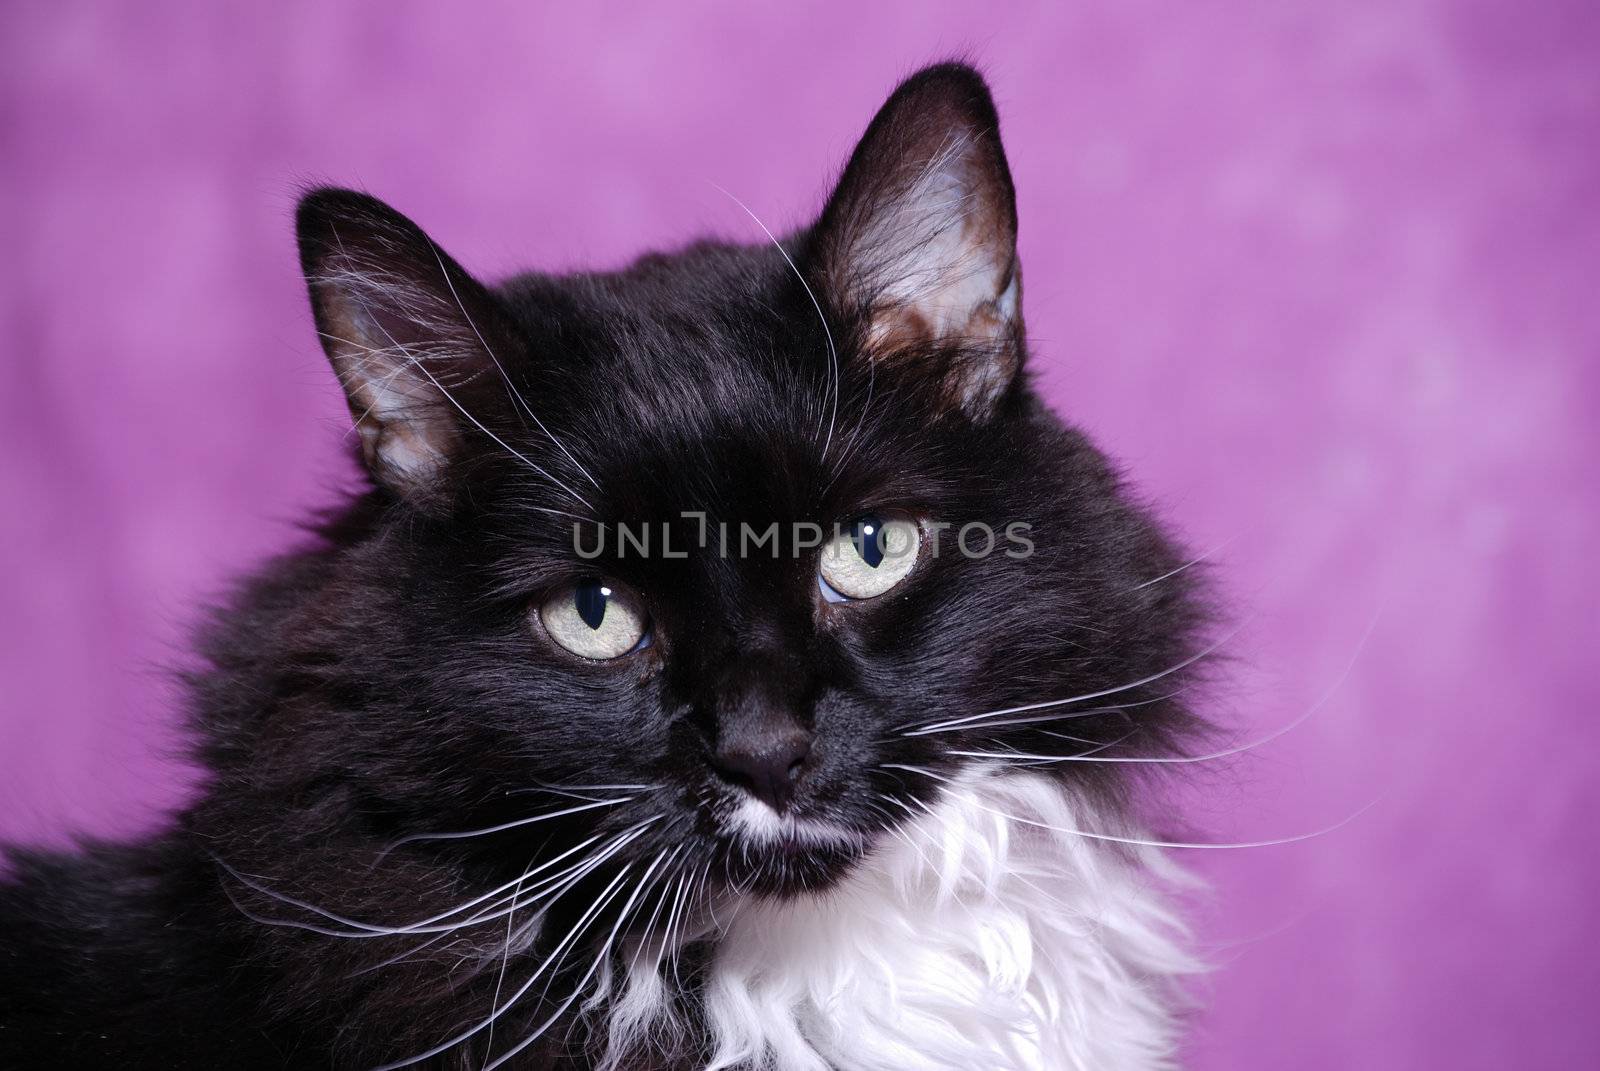 Horizontal image of a pretty black and white cat against a colorful purple background